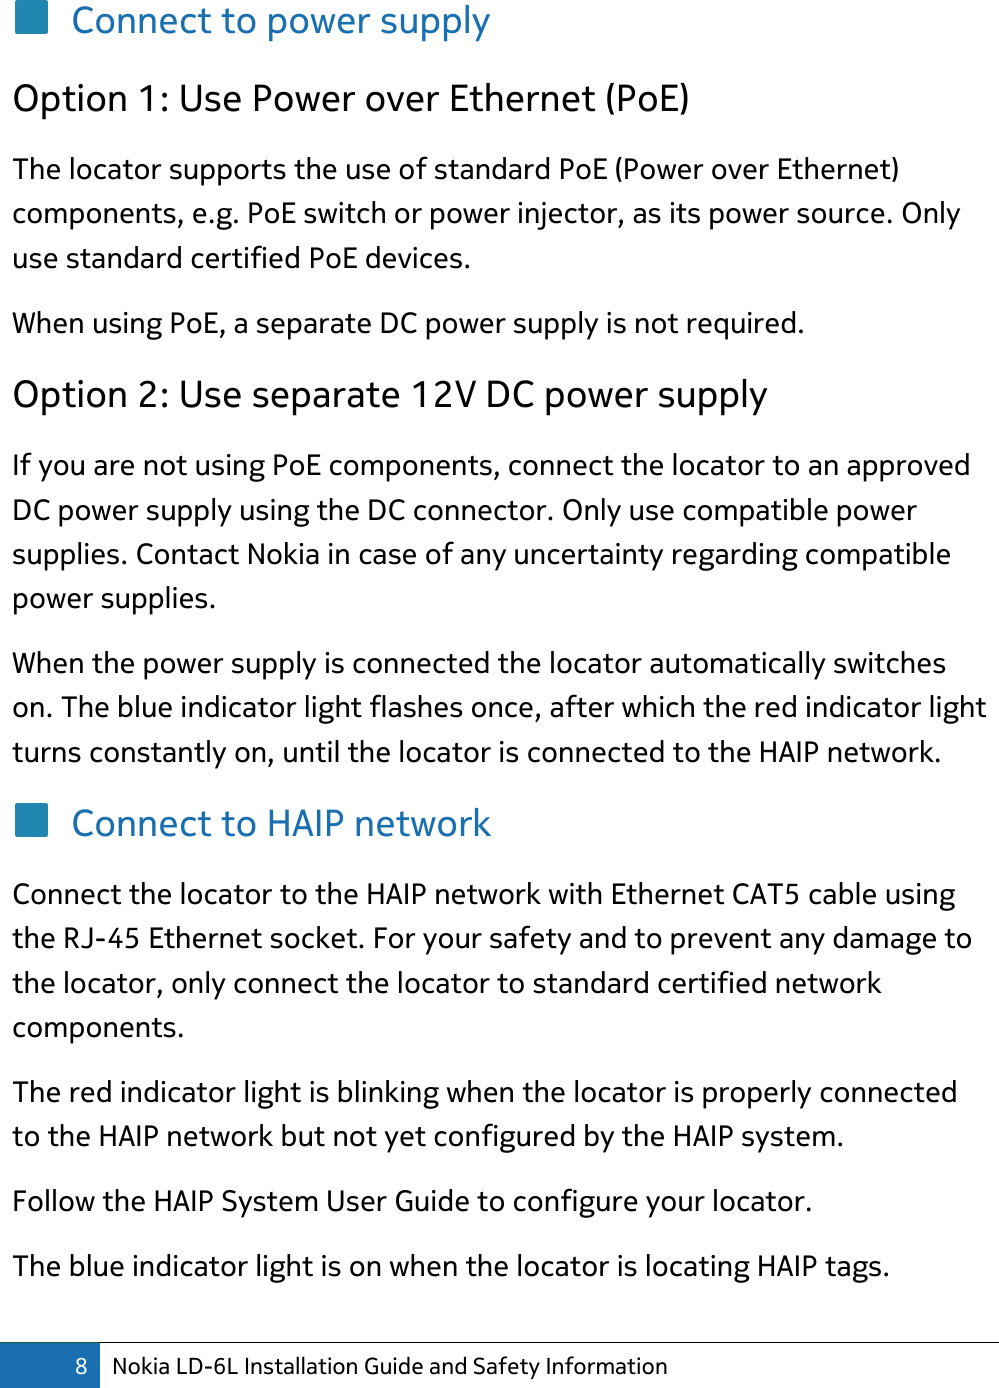 8 Nokia LD-6L Installation Guide and Safety Information  Connect to power supply Option 1: Use Power over Ethernet (PoE) The locator supports the use of standard PoE (Power over Ethernet) components, e.g. PoE switch or power injector, as its power source. Only use standard certified PoE devices. When using PoE, a separate DC power supply is not required.  Option 2: Use separate 12V DC power supply If you are not using PoE components, connect the locator to an approved DC power supply using the DC connector. Only use compatible power supplies. Contact Nokia in case of any uncertainty regarding compatible power supplies. When the power supply is connected the locator automatically switches on. The blue indicator light flashes once, after which the red indicator light turns constantly on, until the locator is connected to the HAIP network. Connect to HAIP network Connect the locator to the HAIP network with Ethernet CAT5 cable using the RJ-45 Ethernet socket. For your safety and to prevent any damage to the locator, only connect the locator to standard certified network components. The red indicator light is blinking when the locator is properly connected to the HAIP network but not yet configured by the HAIP system. Follow the HAIP System User Guide to configure your locator.  The blue indicator light is on when the locator is locating HAIP tags. 